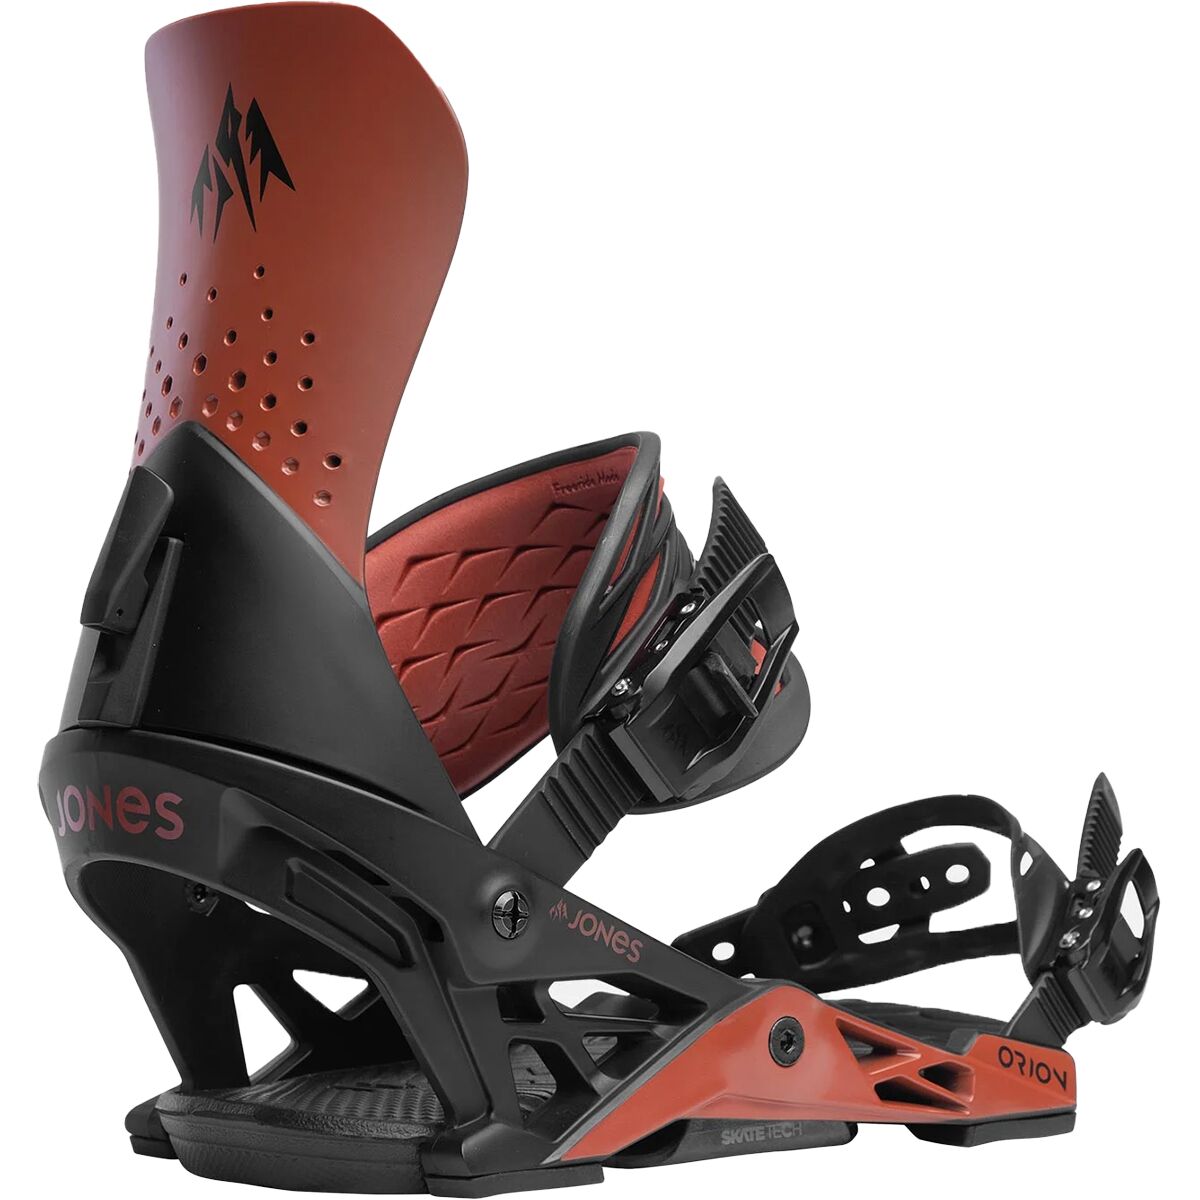 Jones Snowboards Orion Snowboard Binding - 2024 Safety red